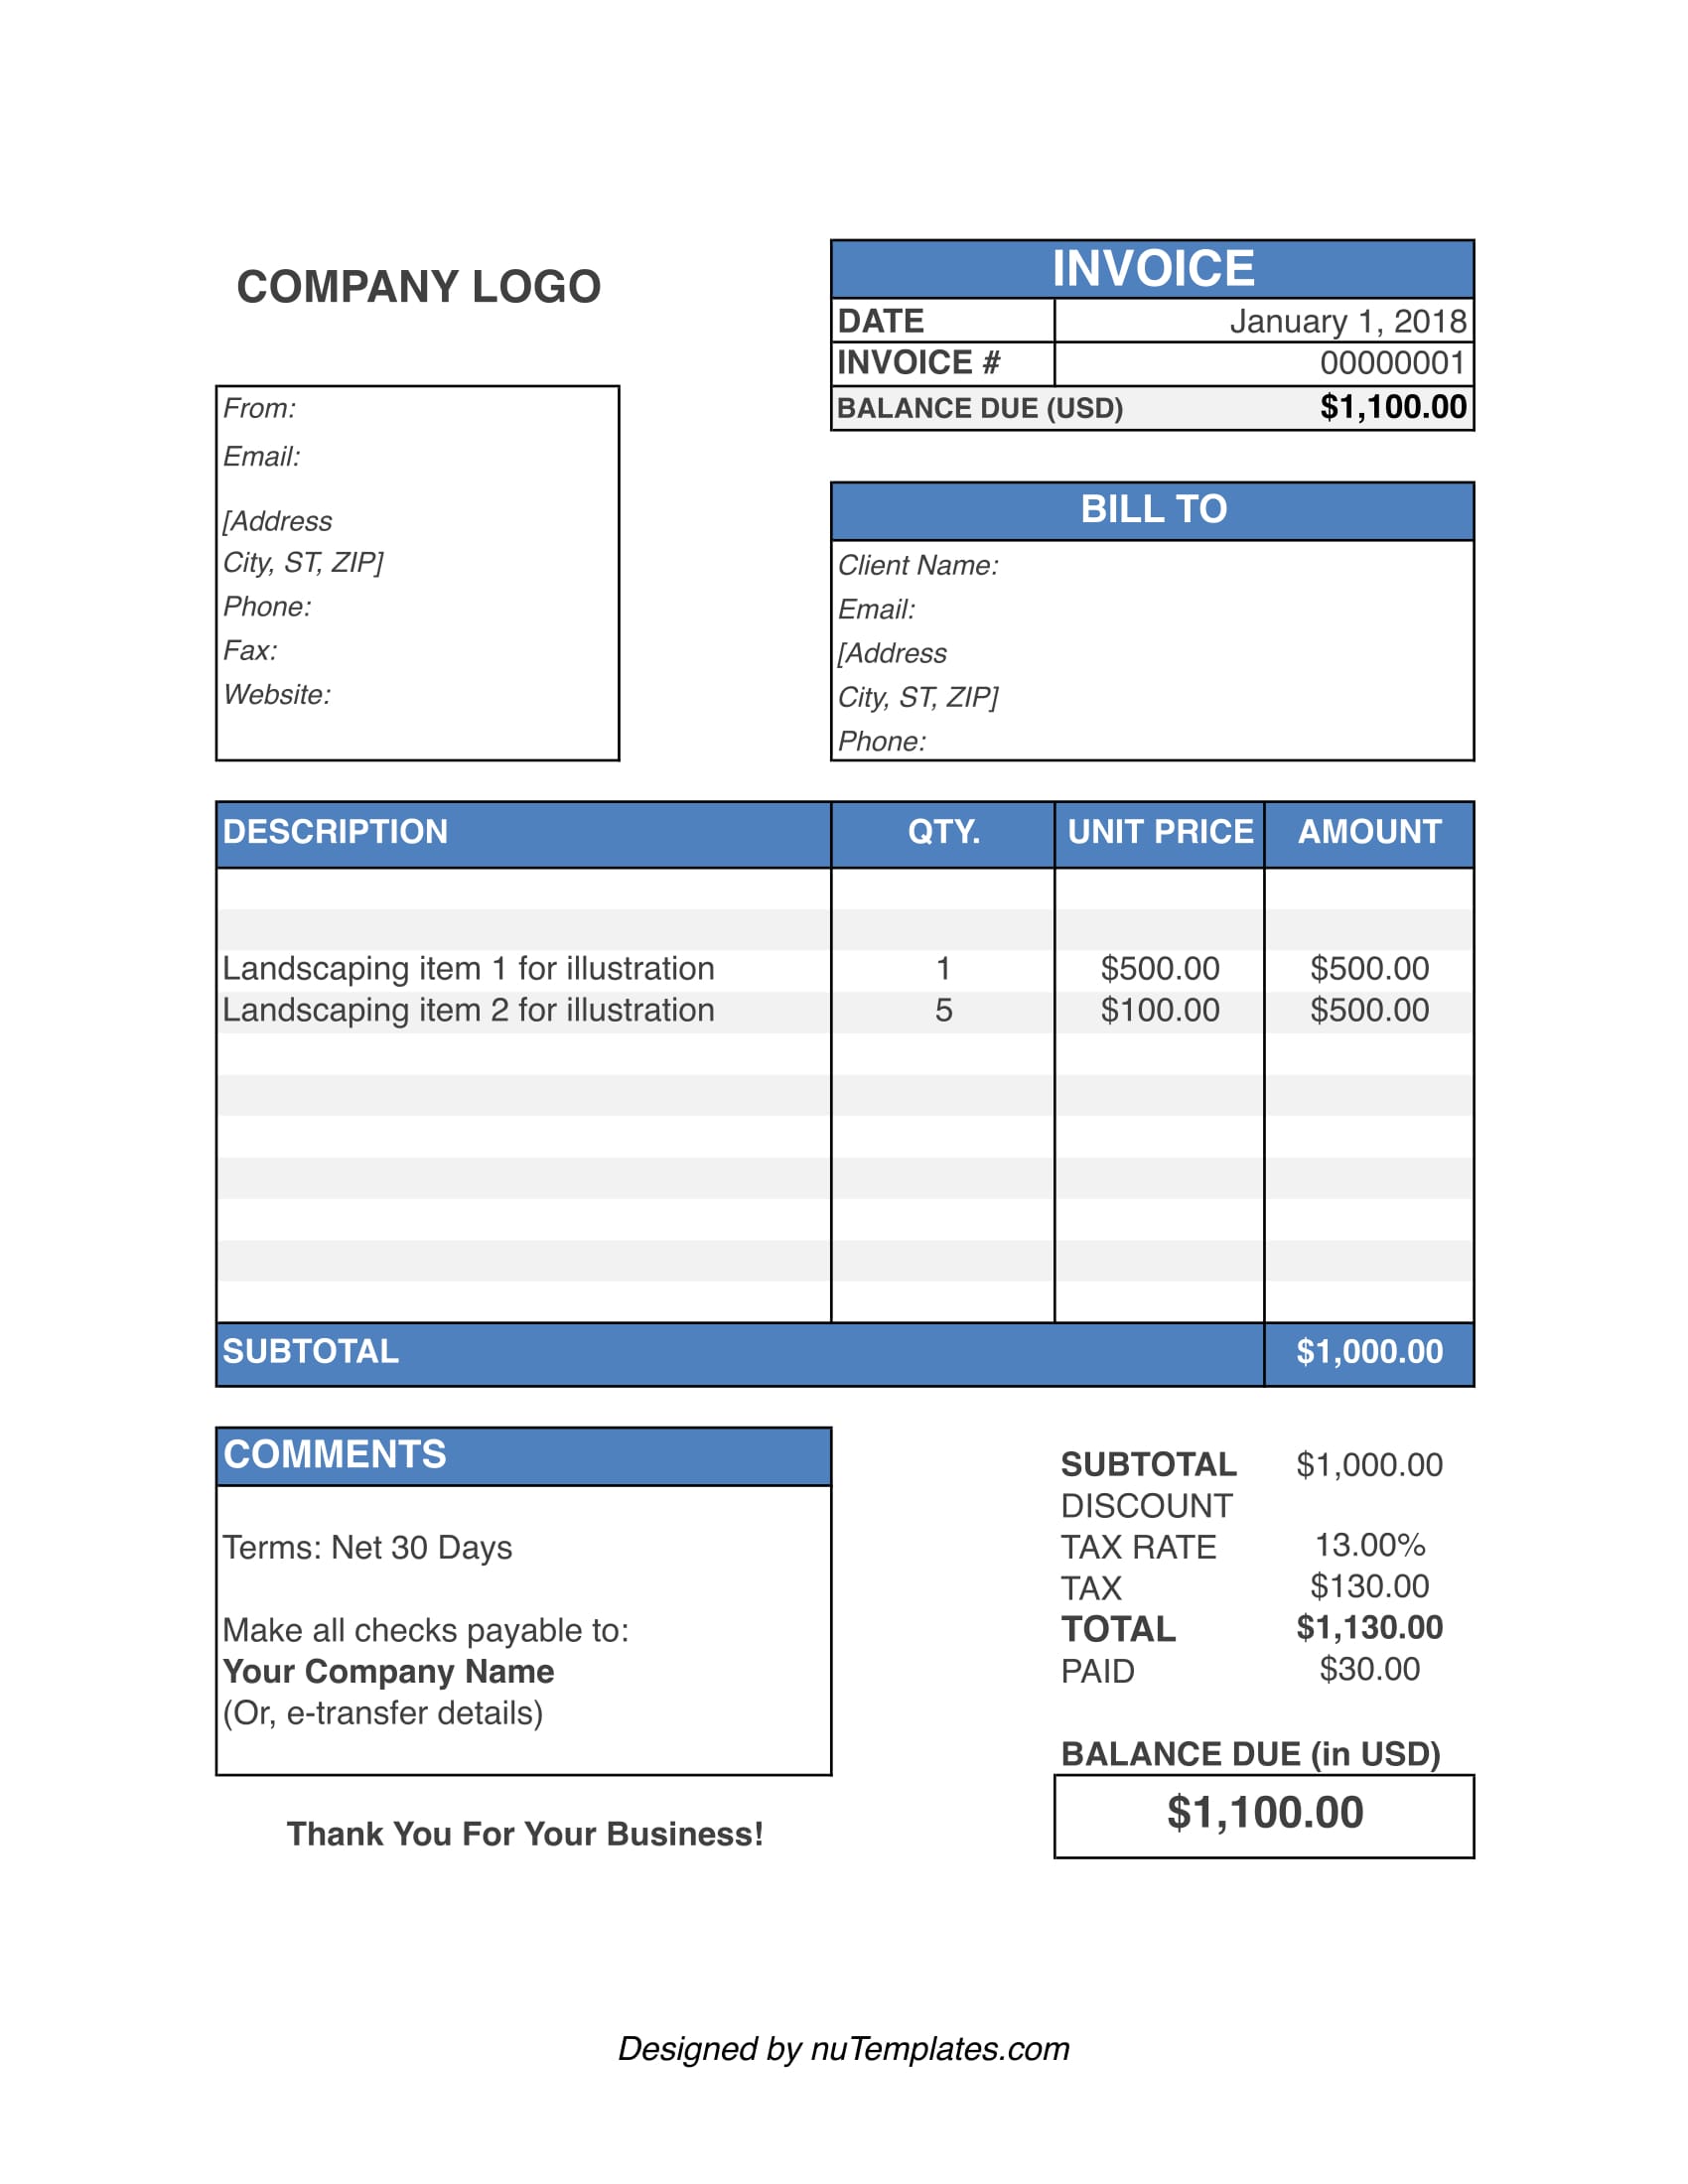 landscaping-invoice-template-landscaping-invoices-nutemplates